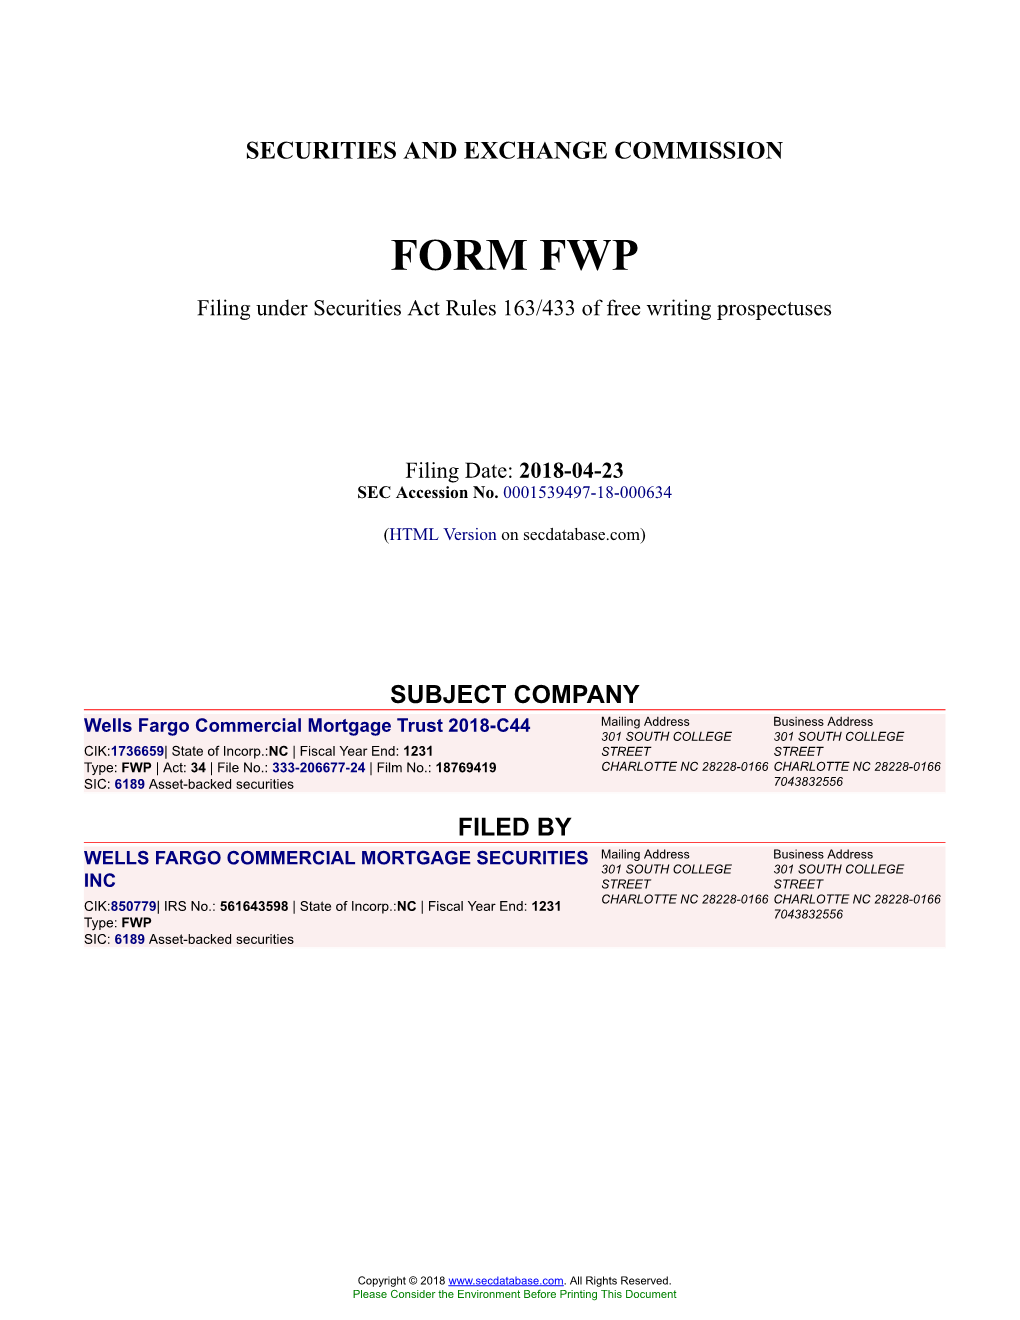 Wells Fargo Commercial Mortgage Trust 2018-C44 Form FWP Filed